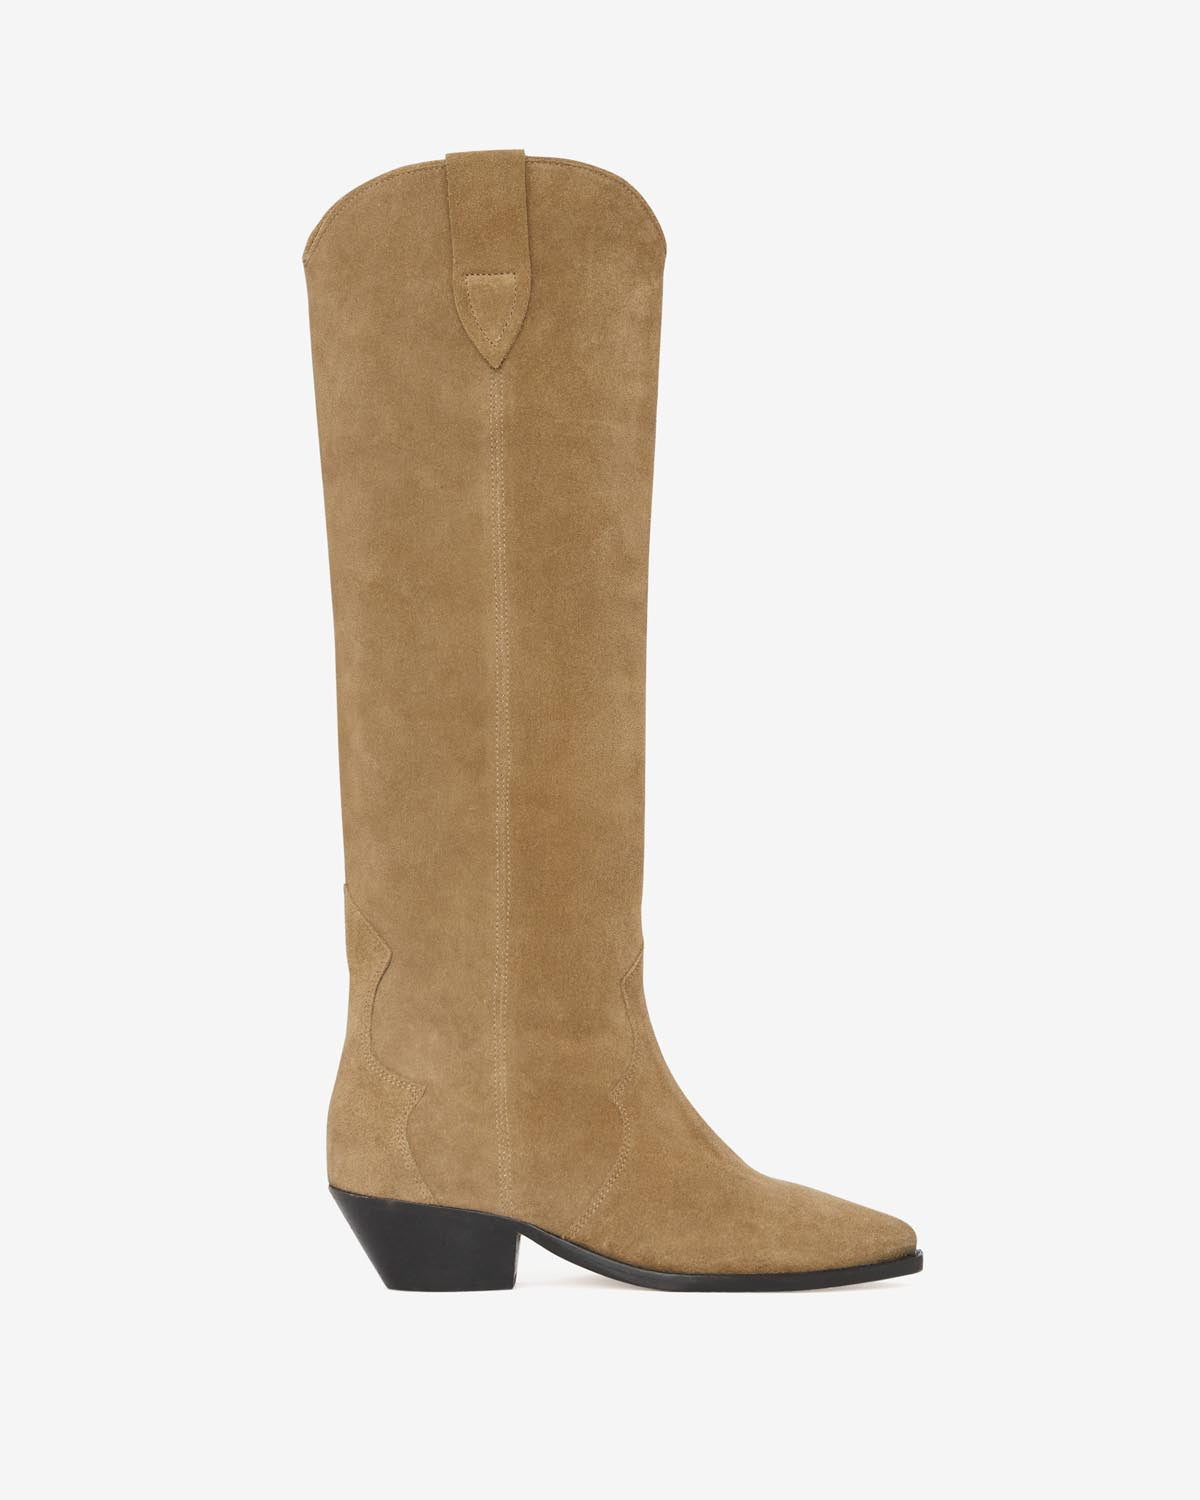 Denvee boots Woman Taupe 7